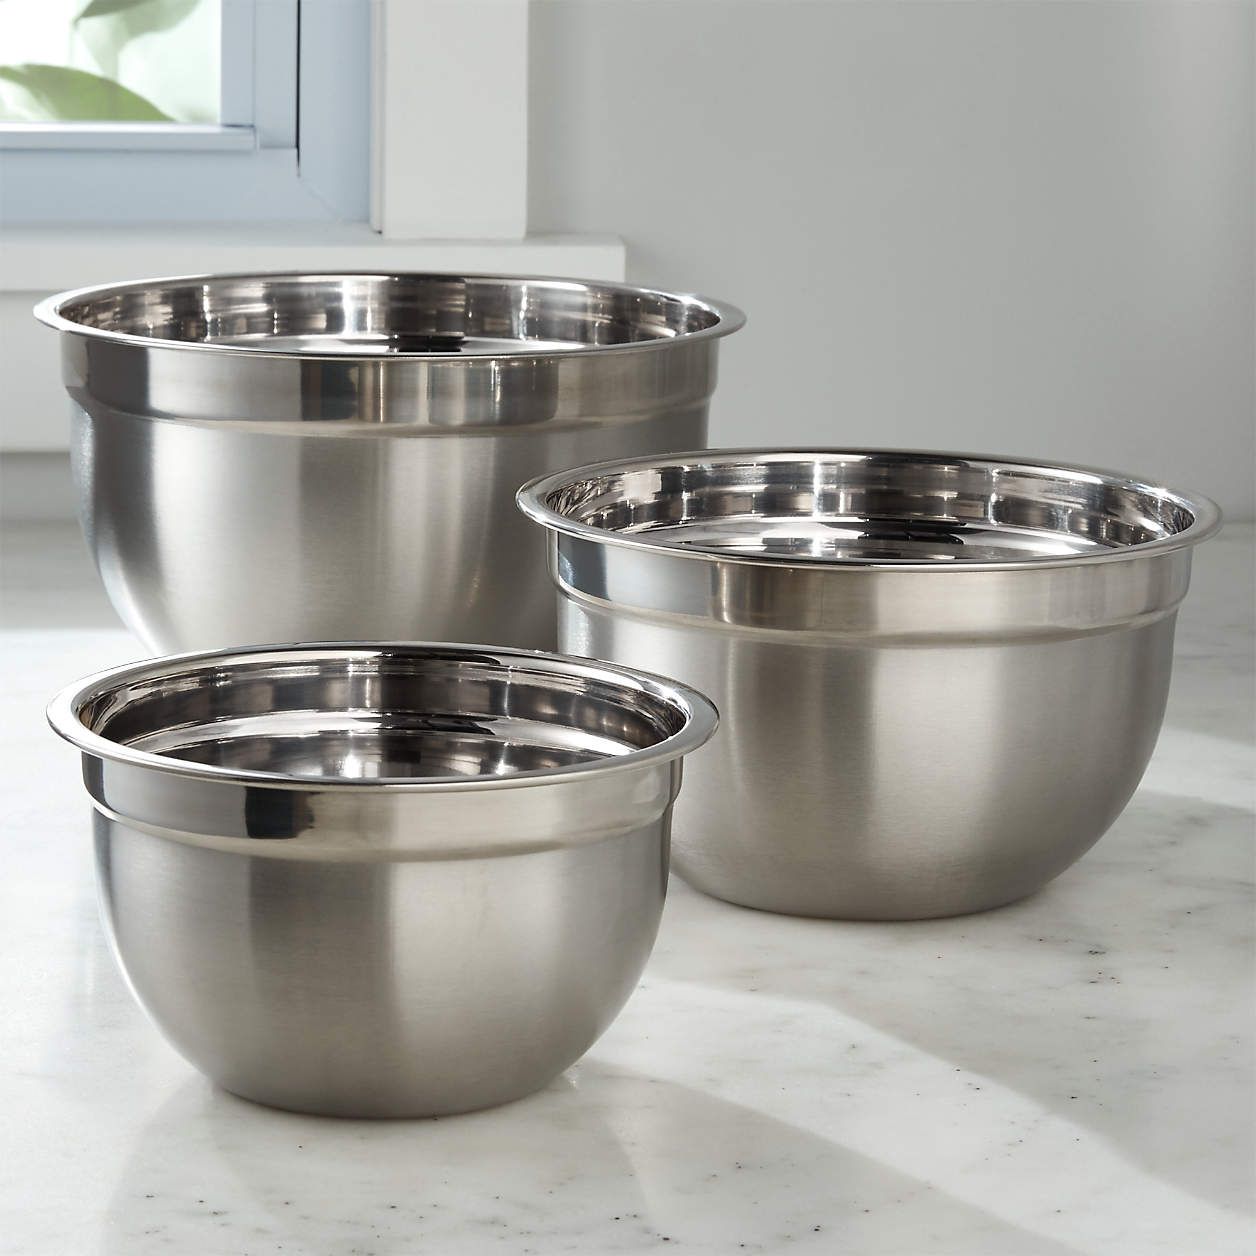 Stainless Steel Bowls, Set of 3 + Reviews | Crate & Barrel | Crate & Barrel